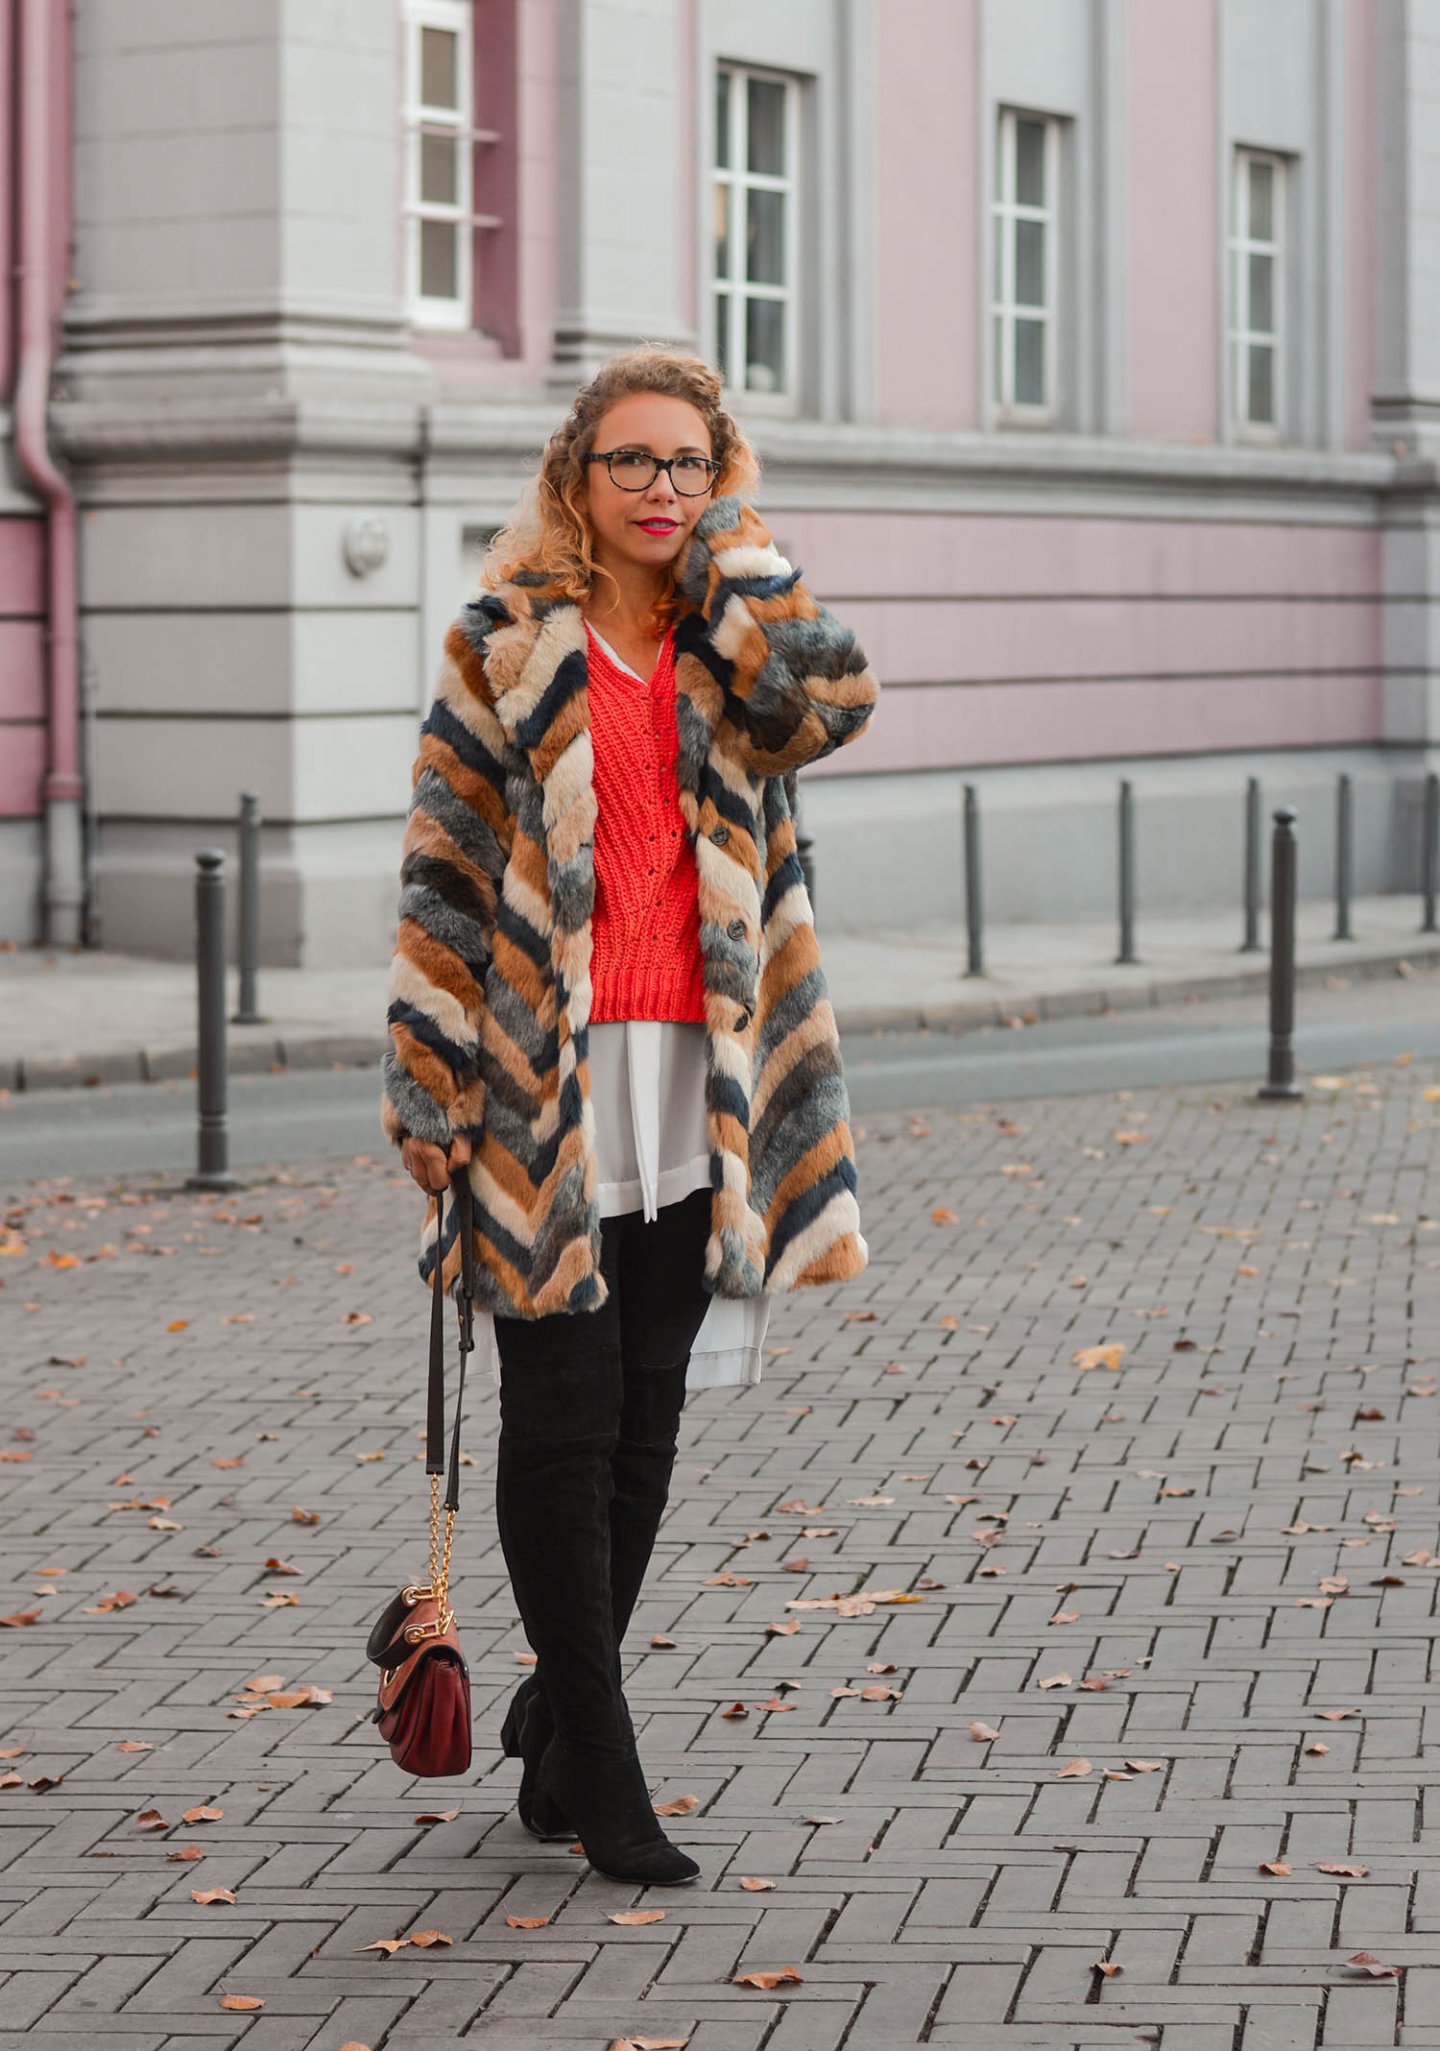 Fake-Fur-Coat-Layering-Overknees-Winter-Outfit-Kationette-Fashionblogger-Germany